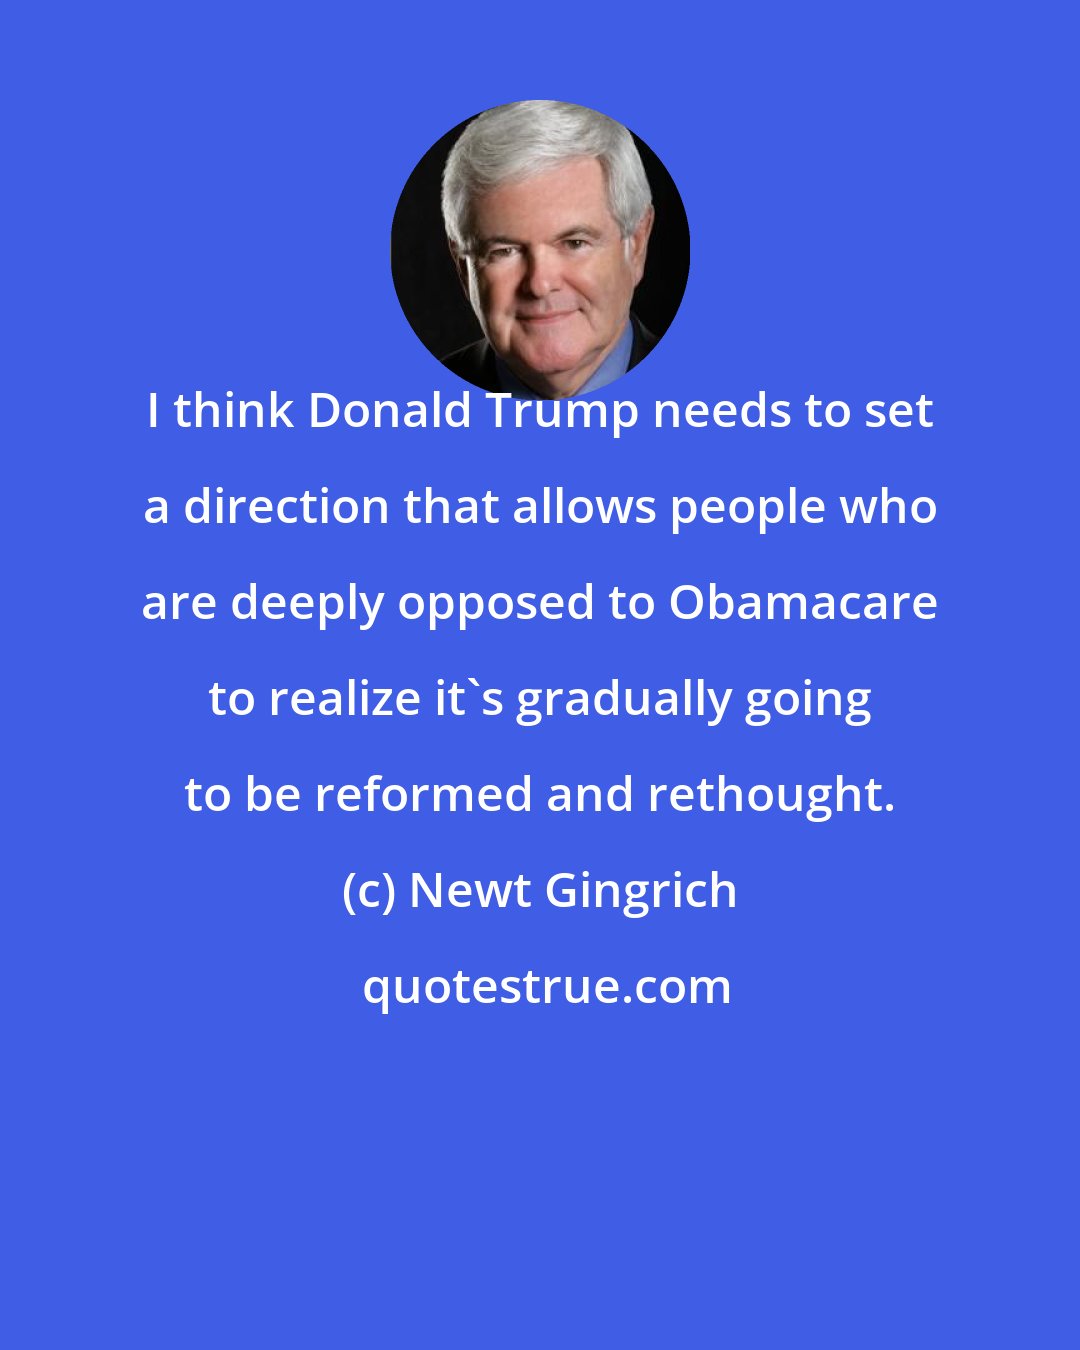 Newt Gingrich: I think Donald Trump needs to set a direction that allows people who are deeply opposed to Obamacare to realize it's gradually going to be reformed and rethought.